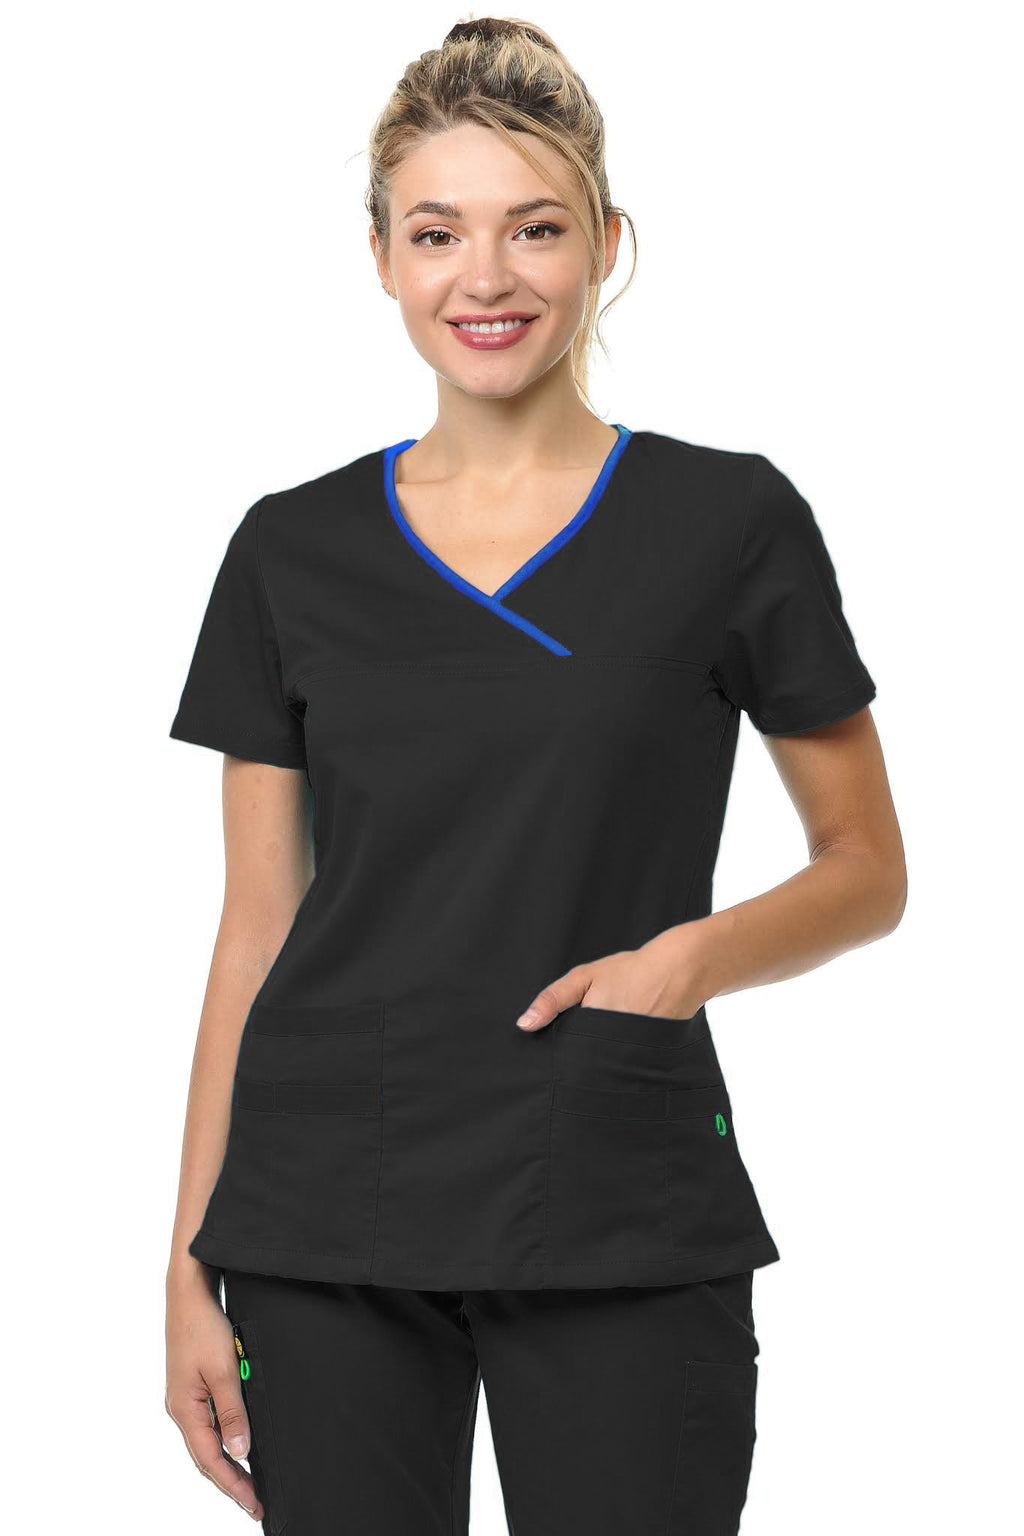 Women's Polyester Rayon 4 Pocket Y-Neck Fitted Top